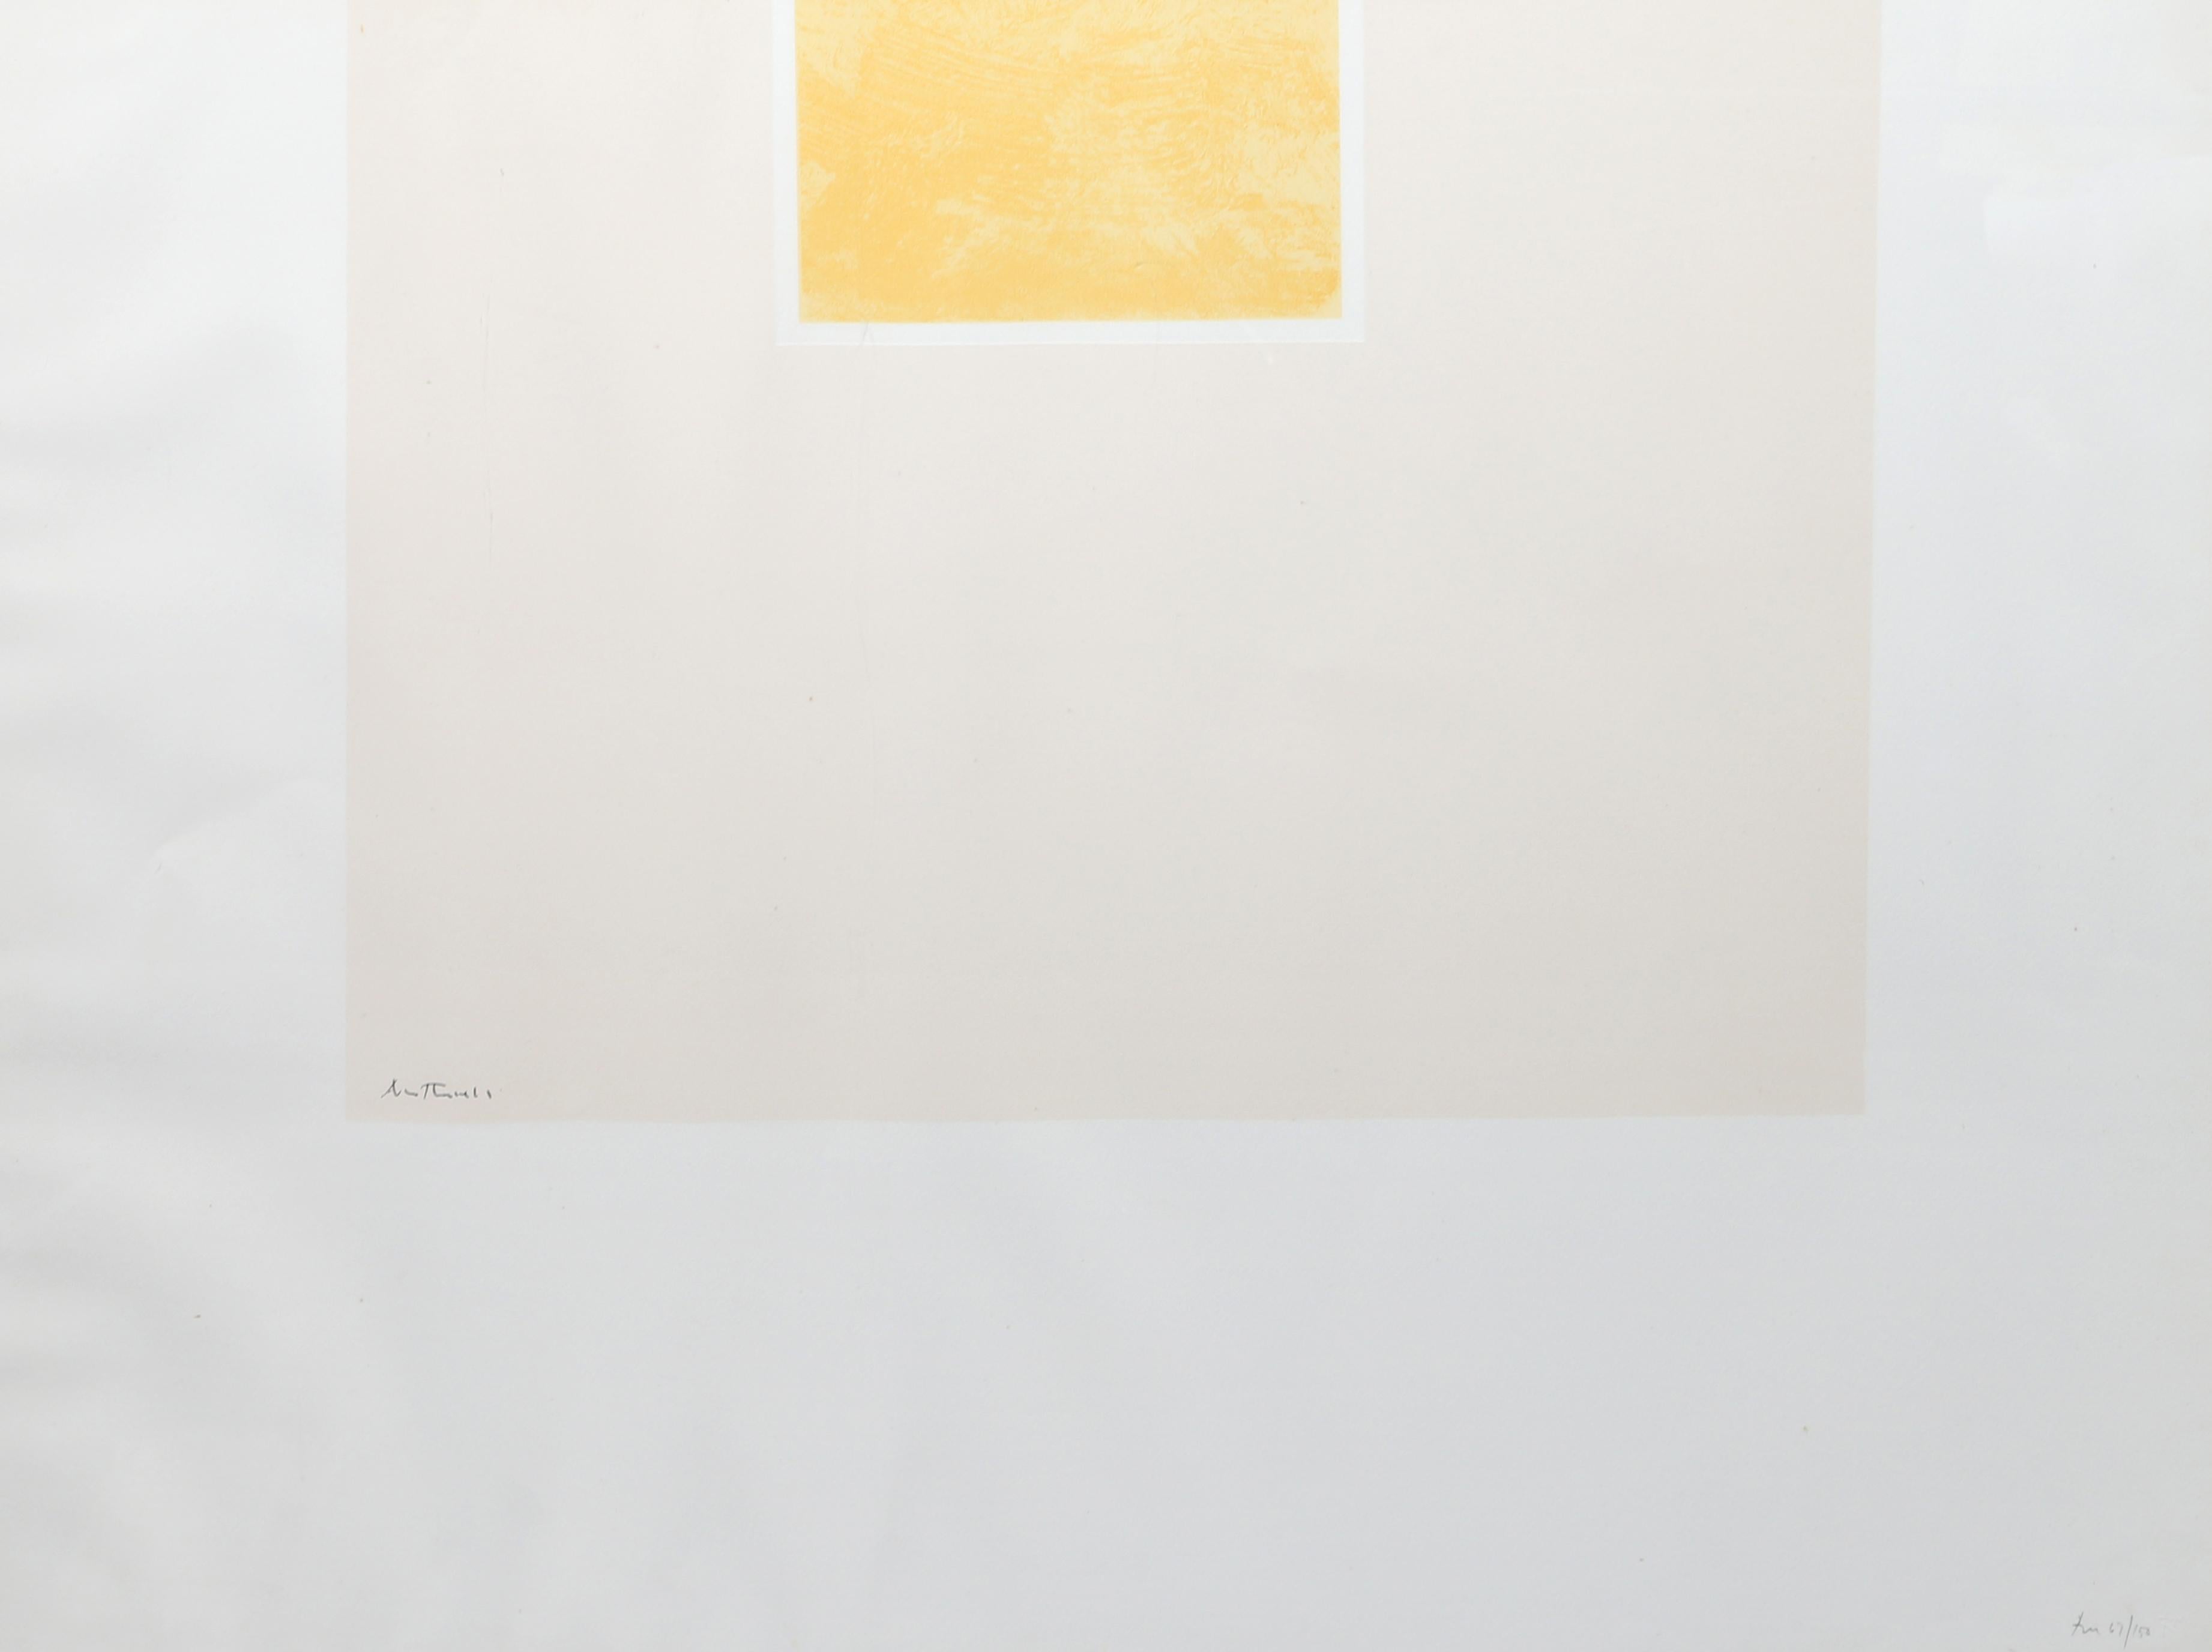 London Series II: Untitled (Yellow/Pink) by Robert Motherwell, American (1915–1991)
Date: 1971
Screenprint, signed and numbered in pencil
Edition of 67/150
Size: 28.25 x 41 in. (71.76 x 104.14 cm)
Frame Size: 34 x 43 inches
Printer: Kelpra Studio,